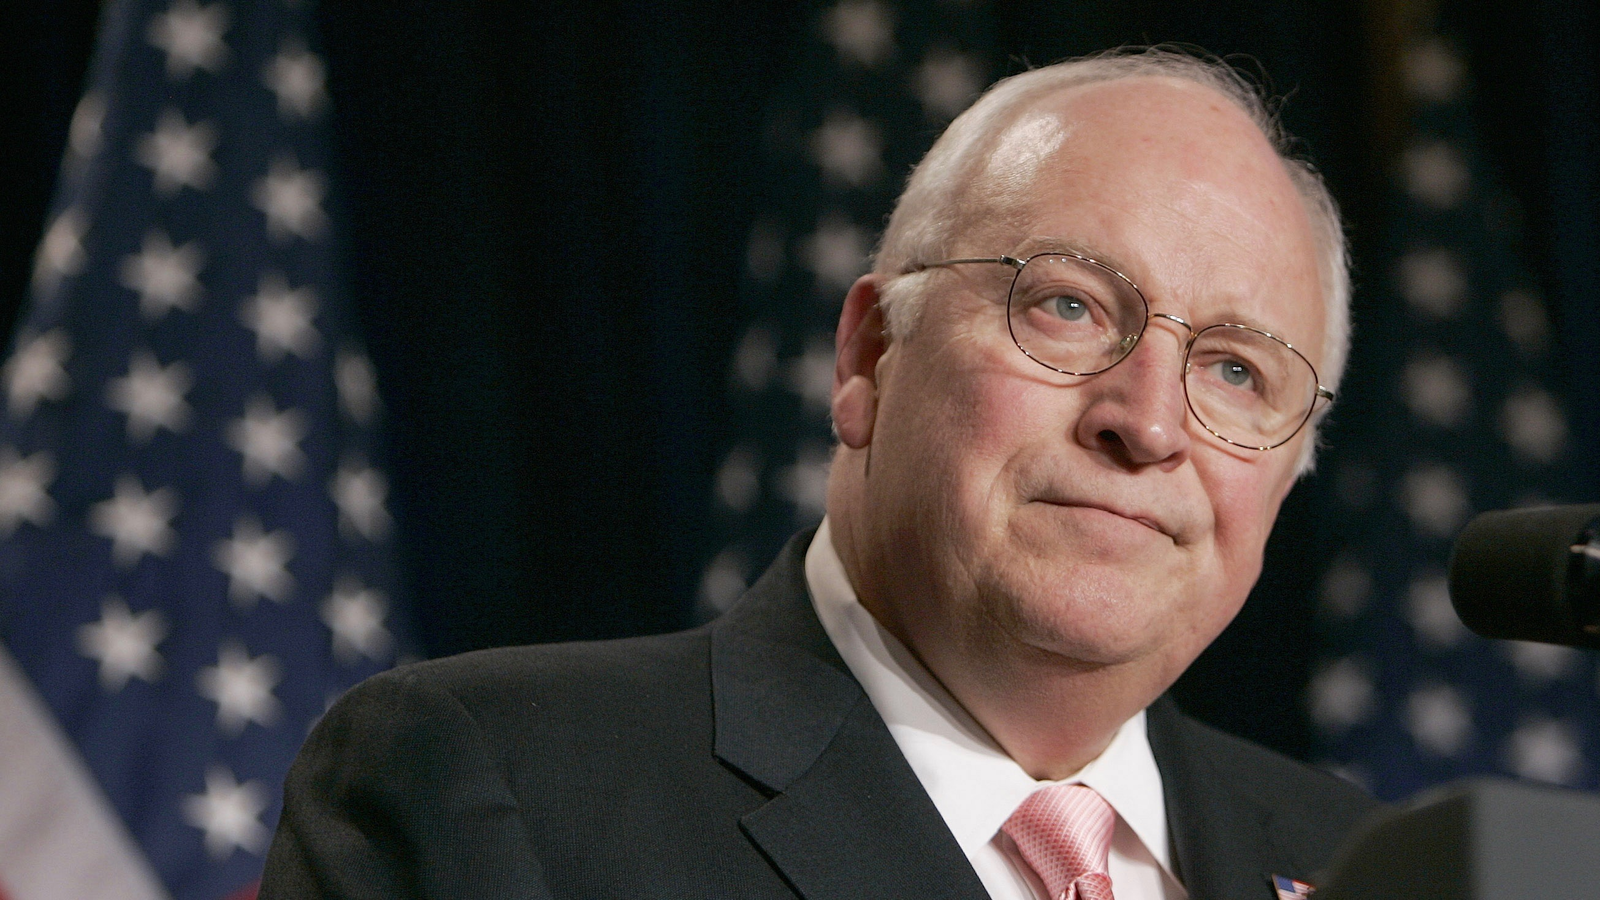 Dick cheney voted against mlk